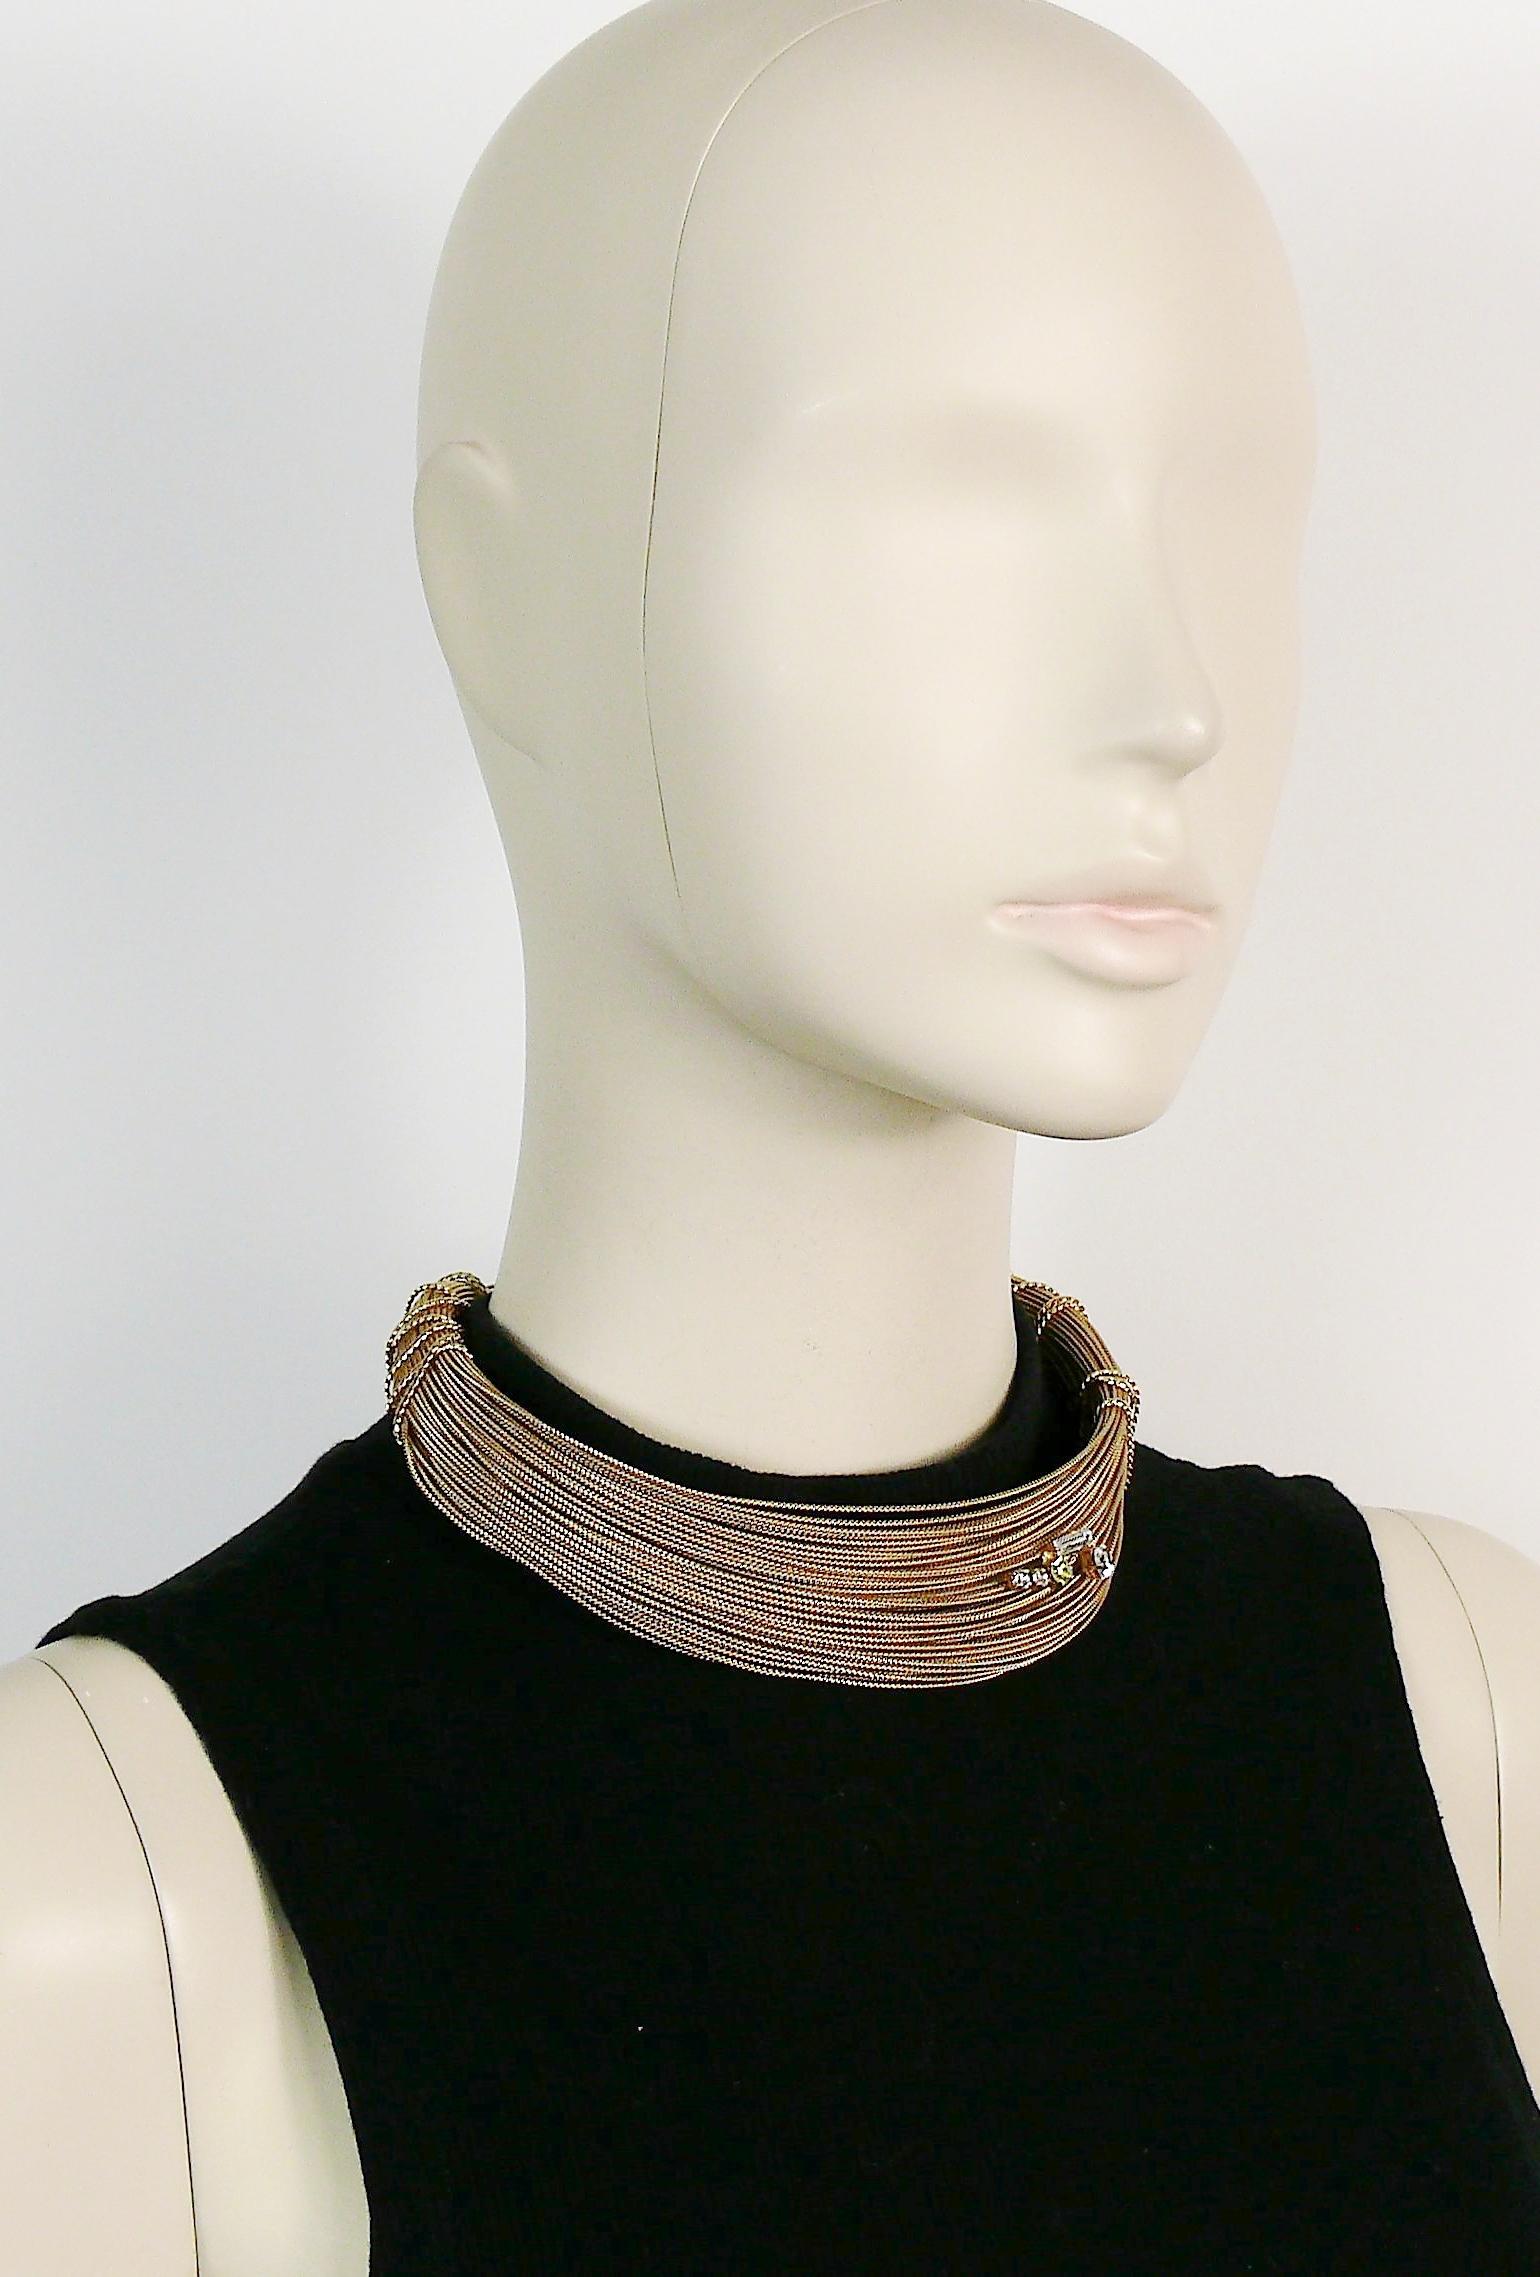 Christian Lacroix Vintage Gold Toned Bundled Textured Wires Crystal Rigid Choker In Excellent Condition For Sale In Nice, FR